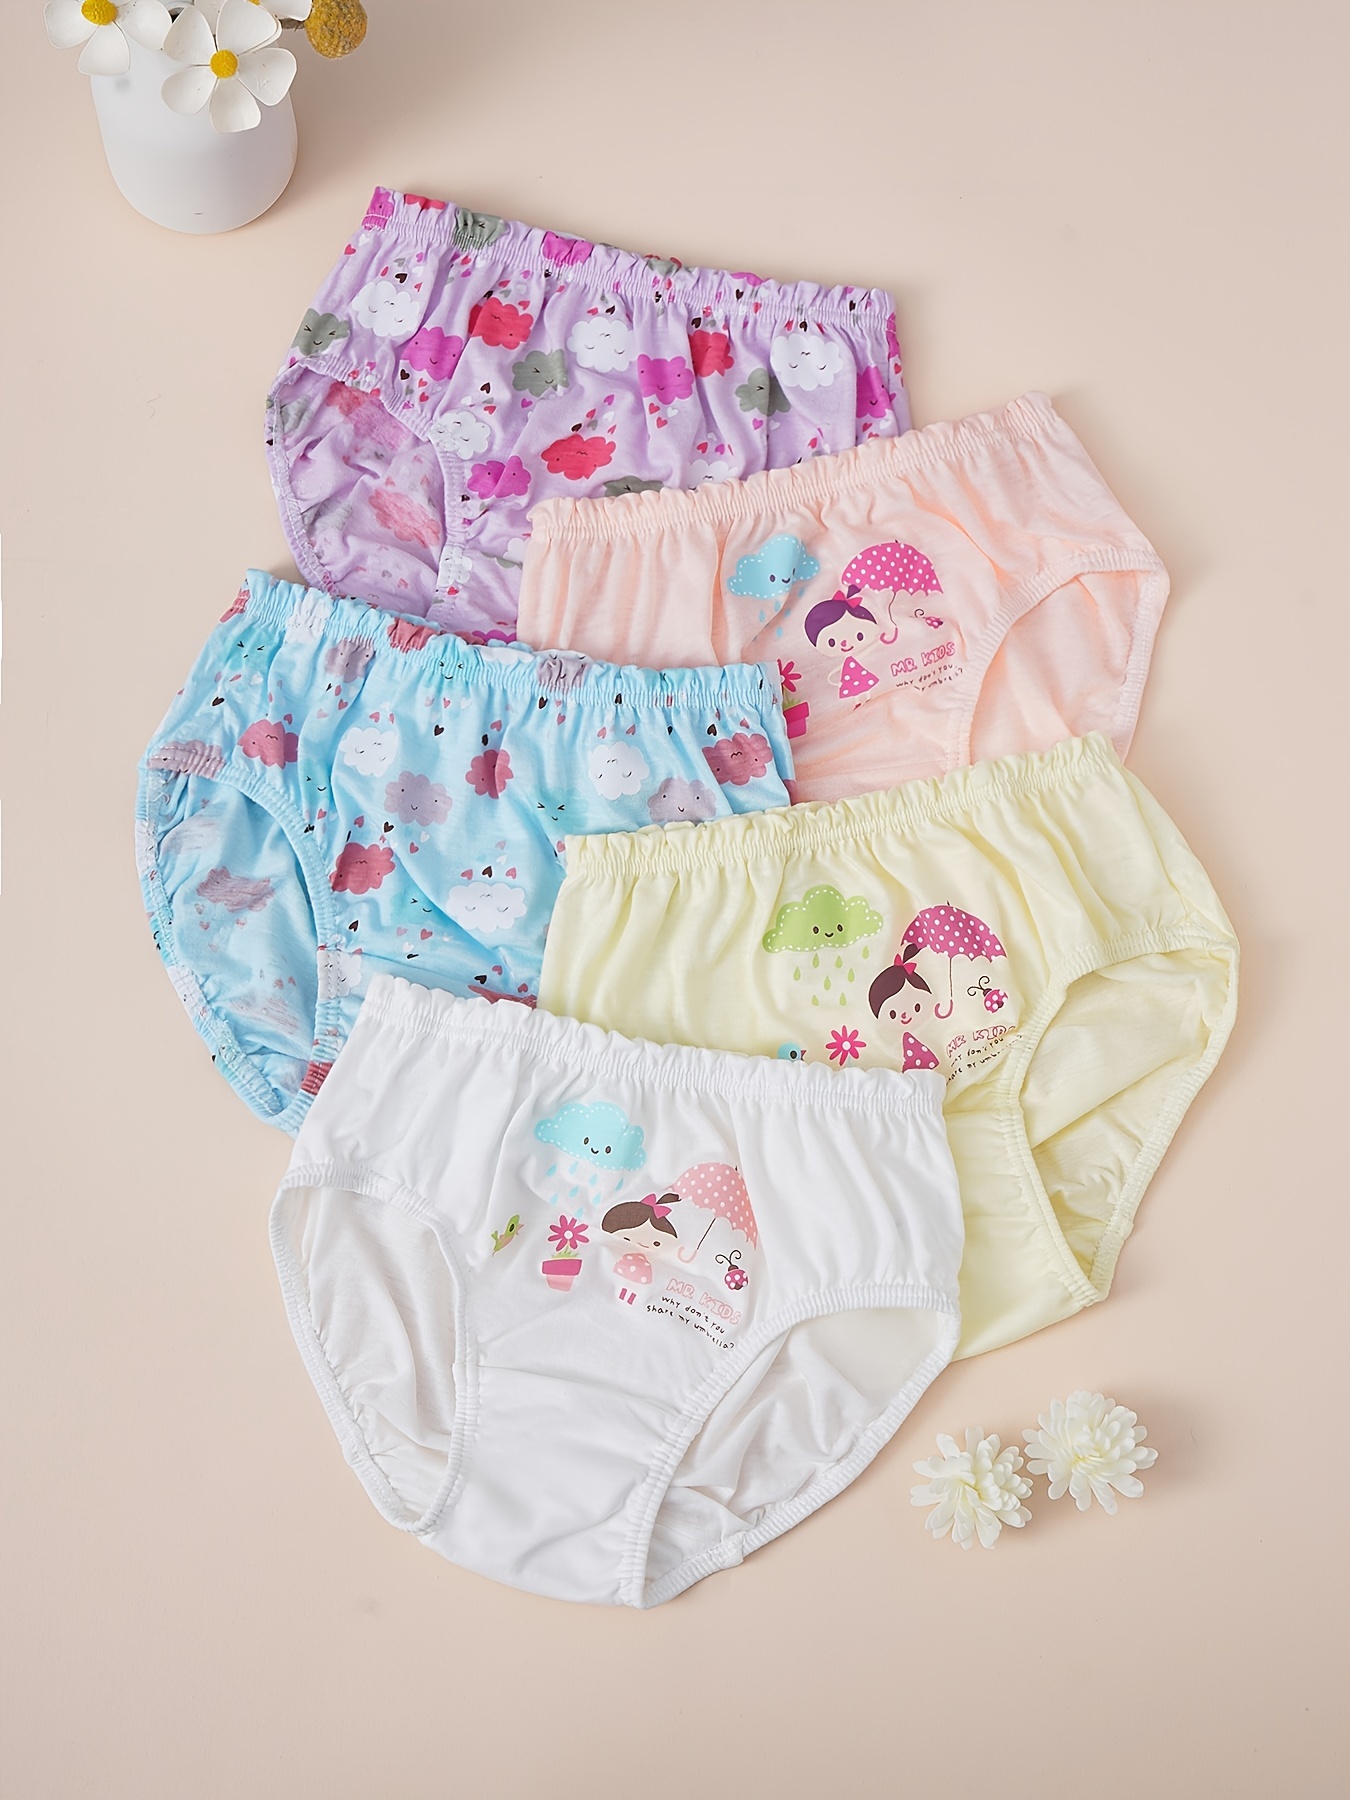  Little Girls Soft 100% Cotton Underwear Bring Cool  Breathable Comfort Experience Panty 4Year